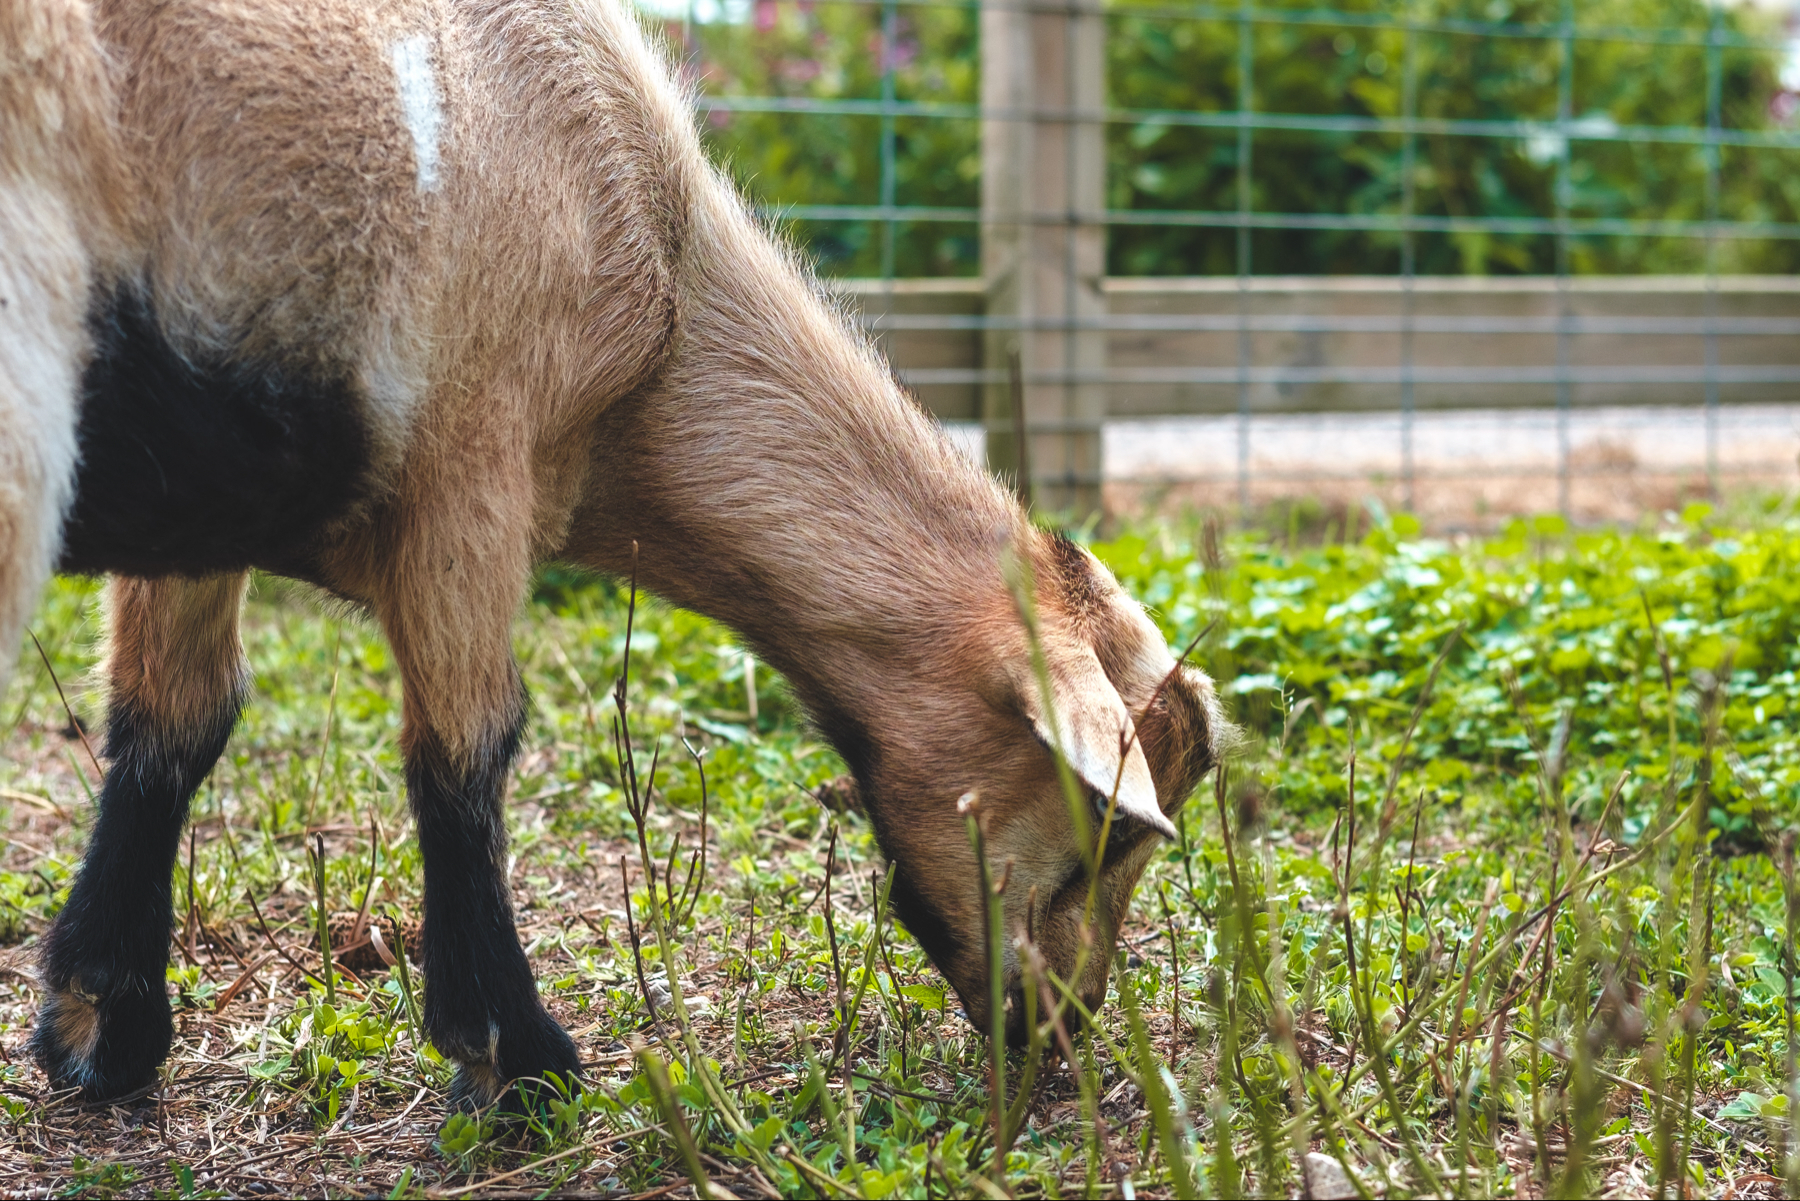 A young goat grazing in a grassy area with a fence in the background.